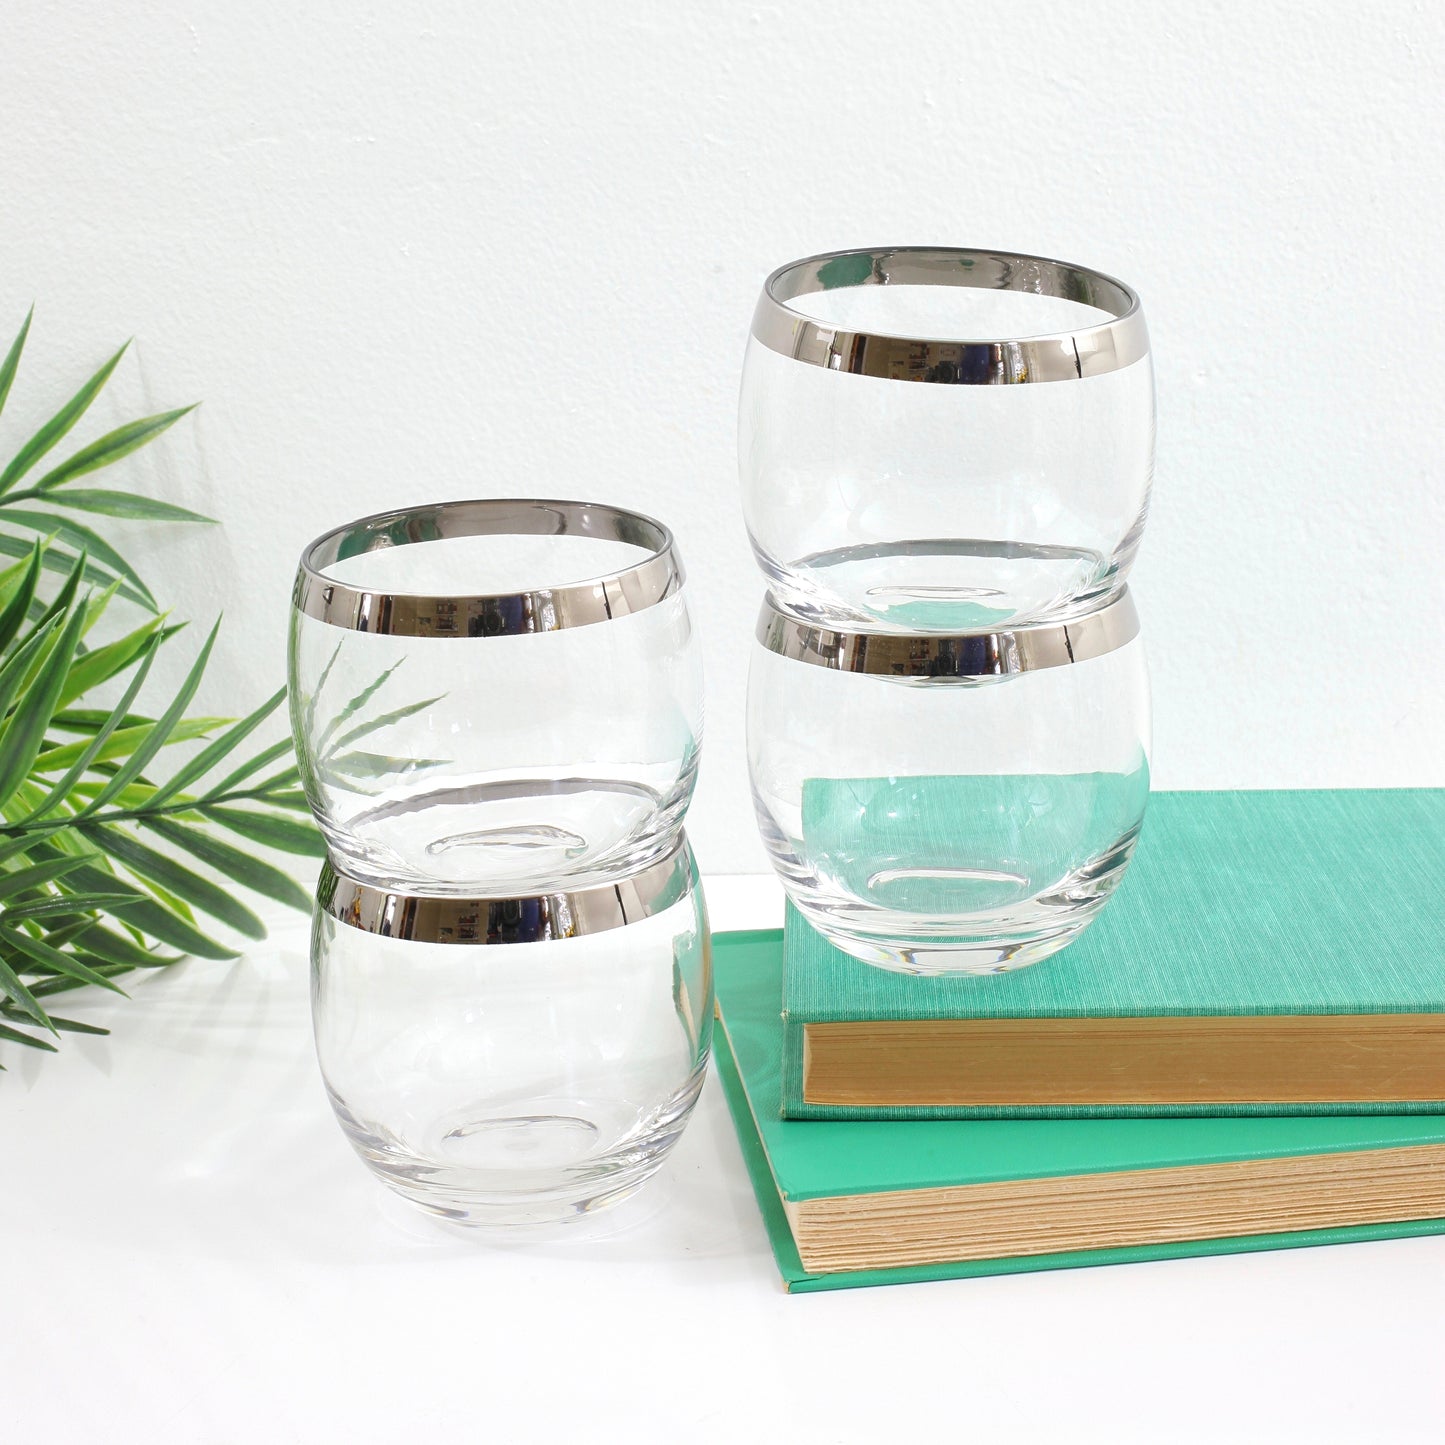 SOLD - Mid Century Modern Silver Rim Cocktail Glasses